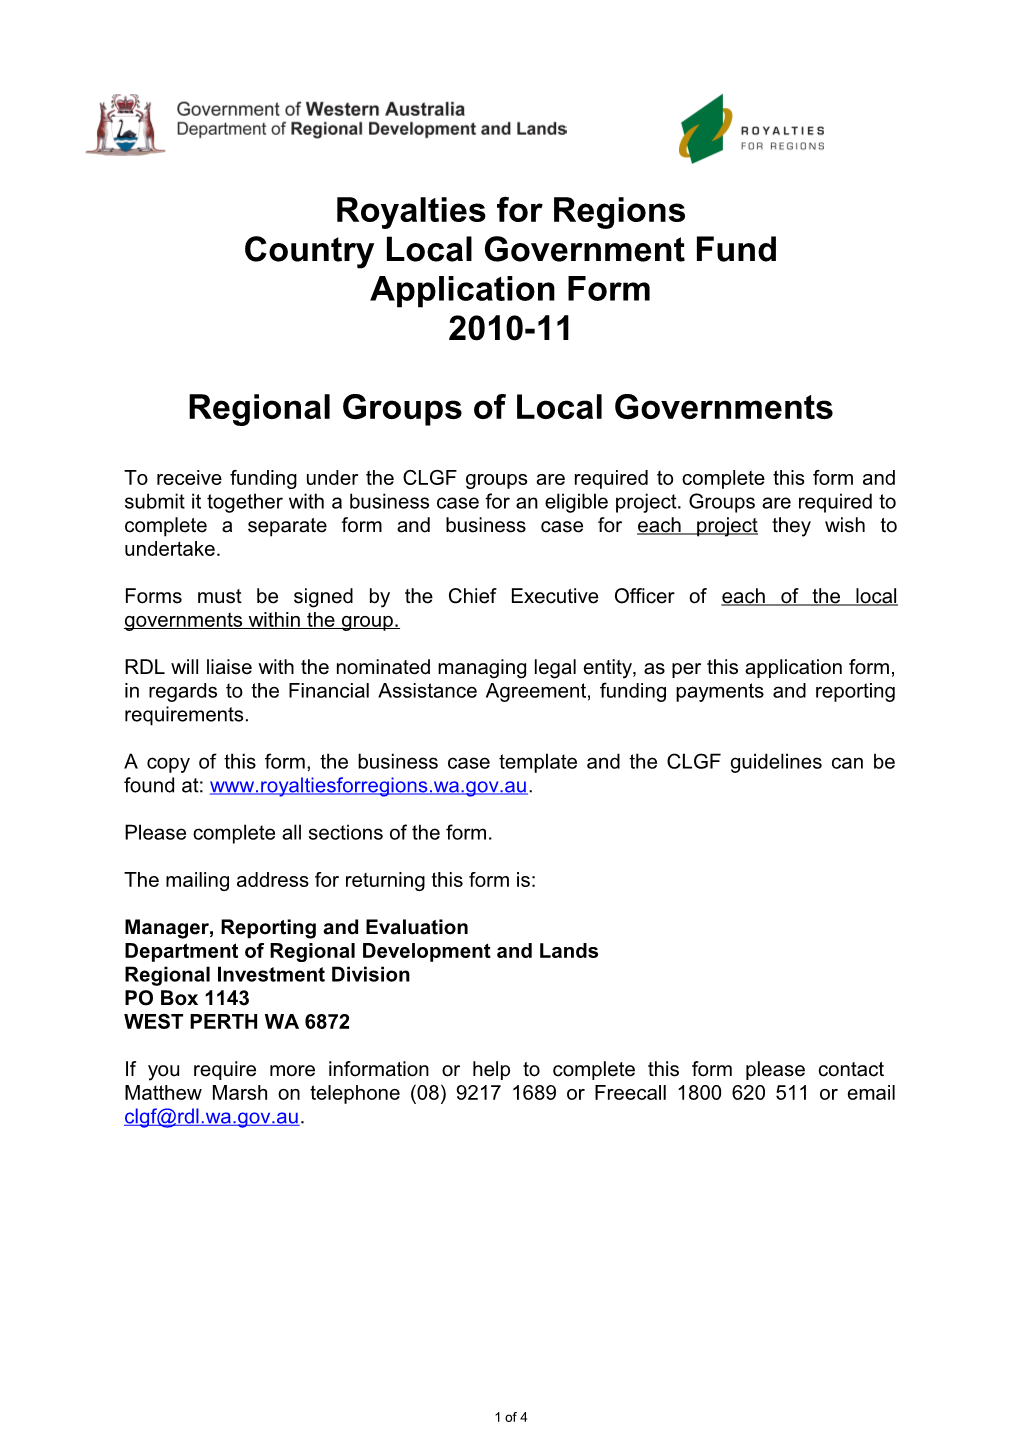 CLGF (2010-11) Regional Groups of Local Governments Application Form